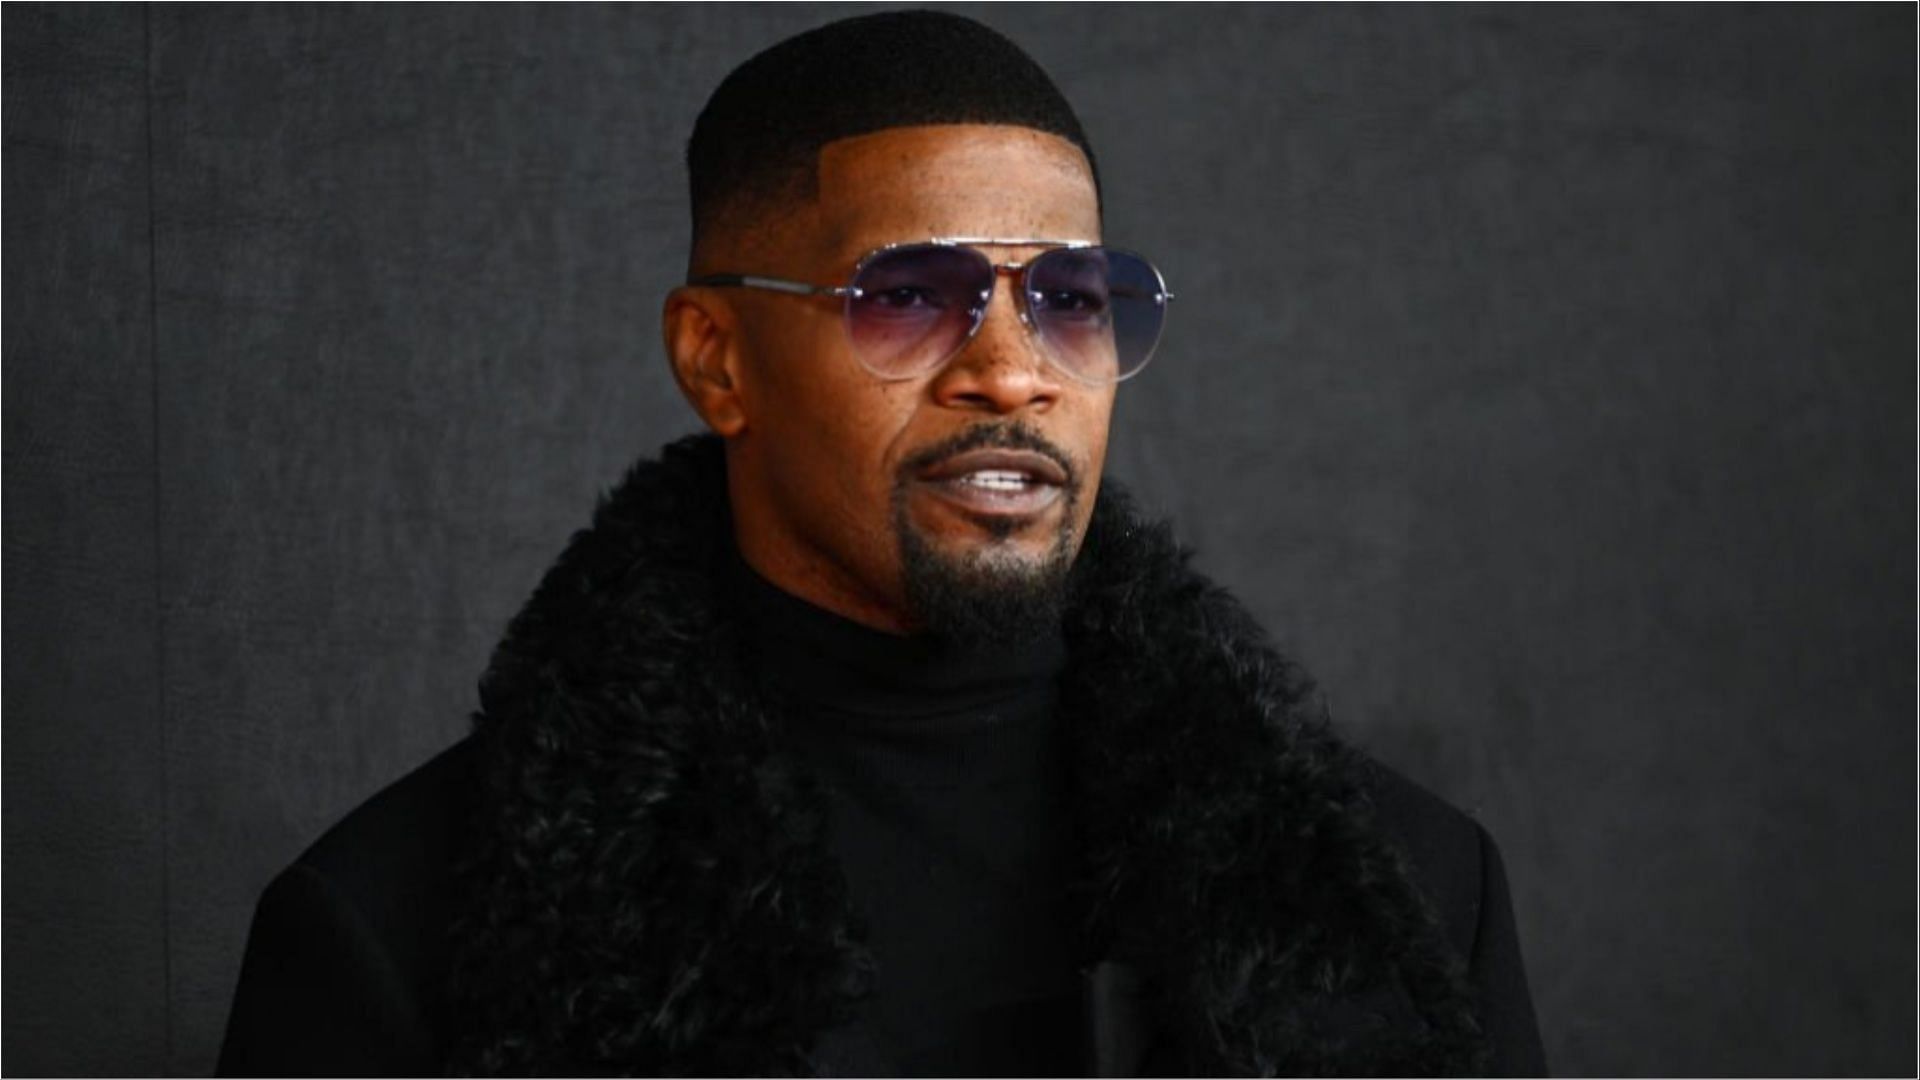 Jamie Foxx apologized through Instagram for his antisemitic post (Image via Joe Maher/Getty Images)